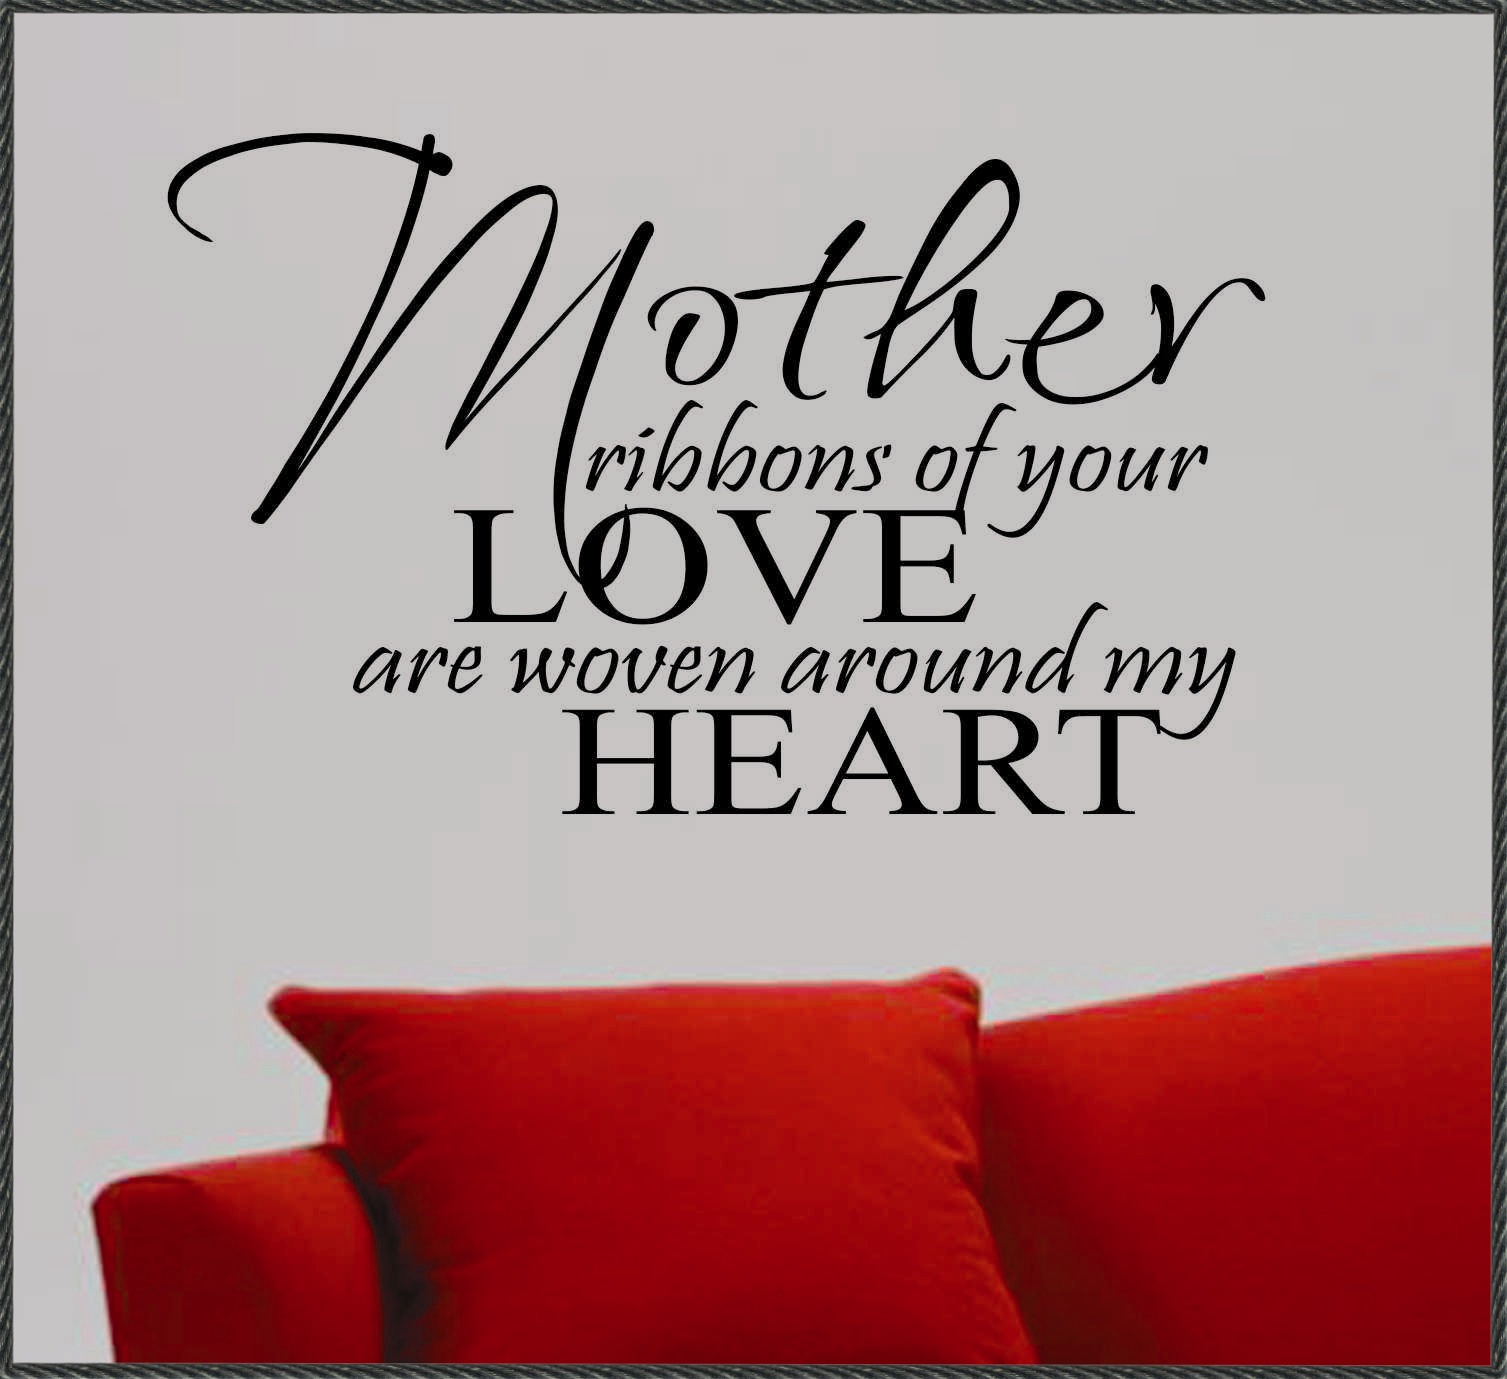 We Love You Mom Quotes. QuotesGram